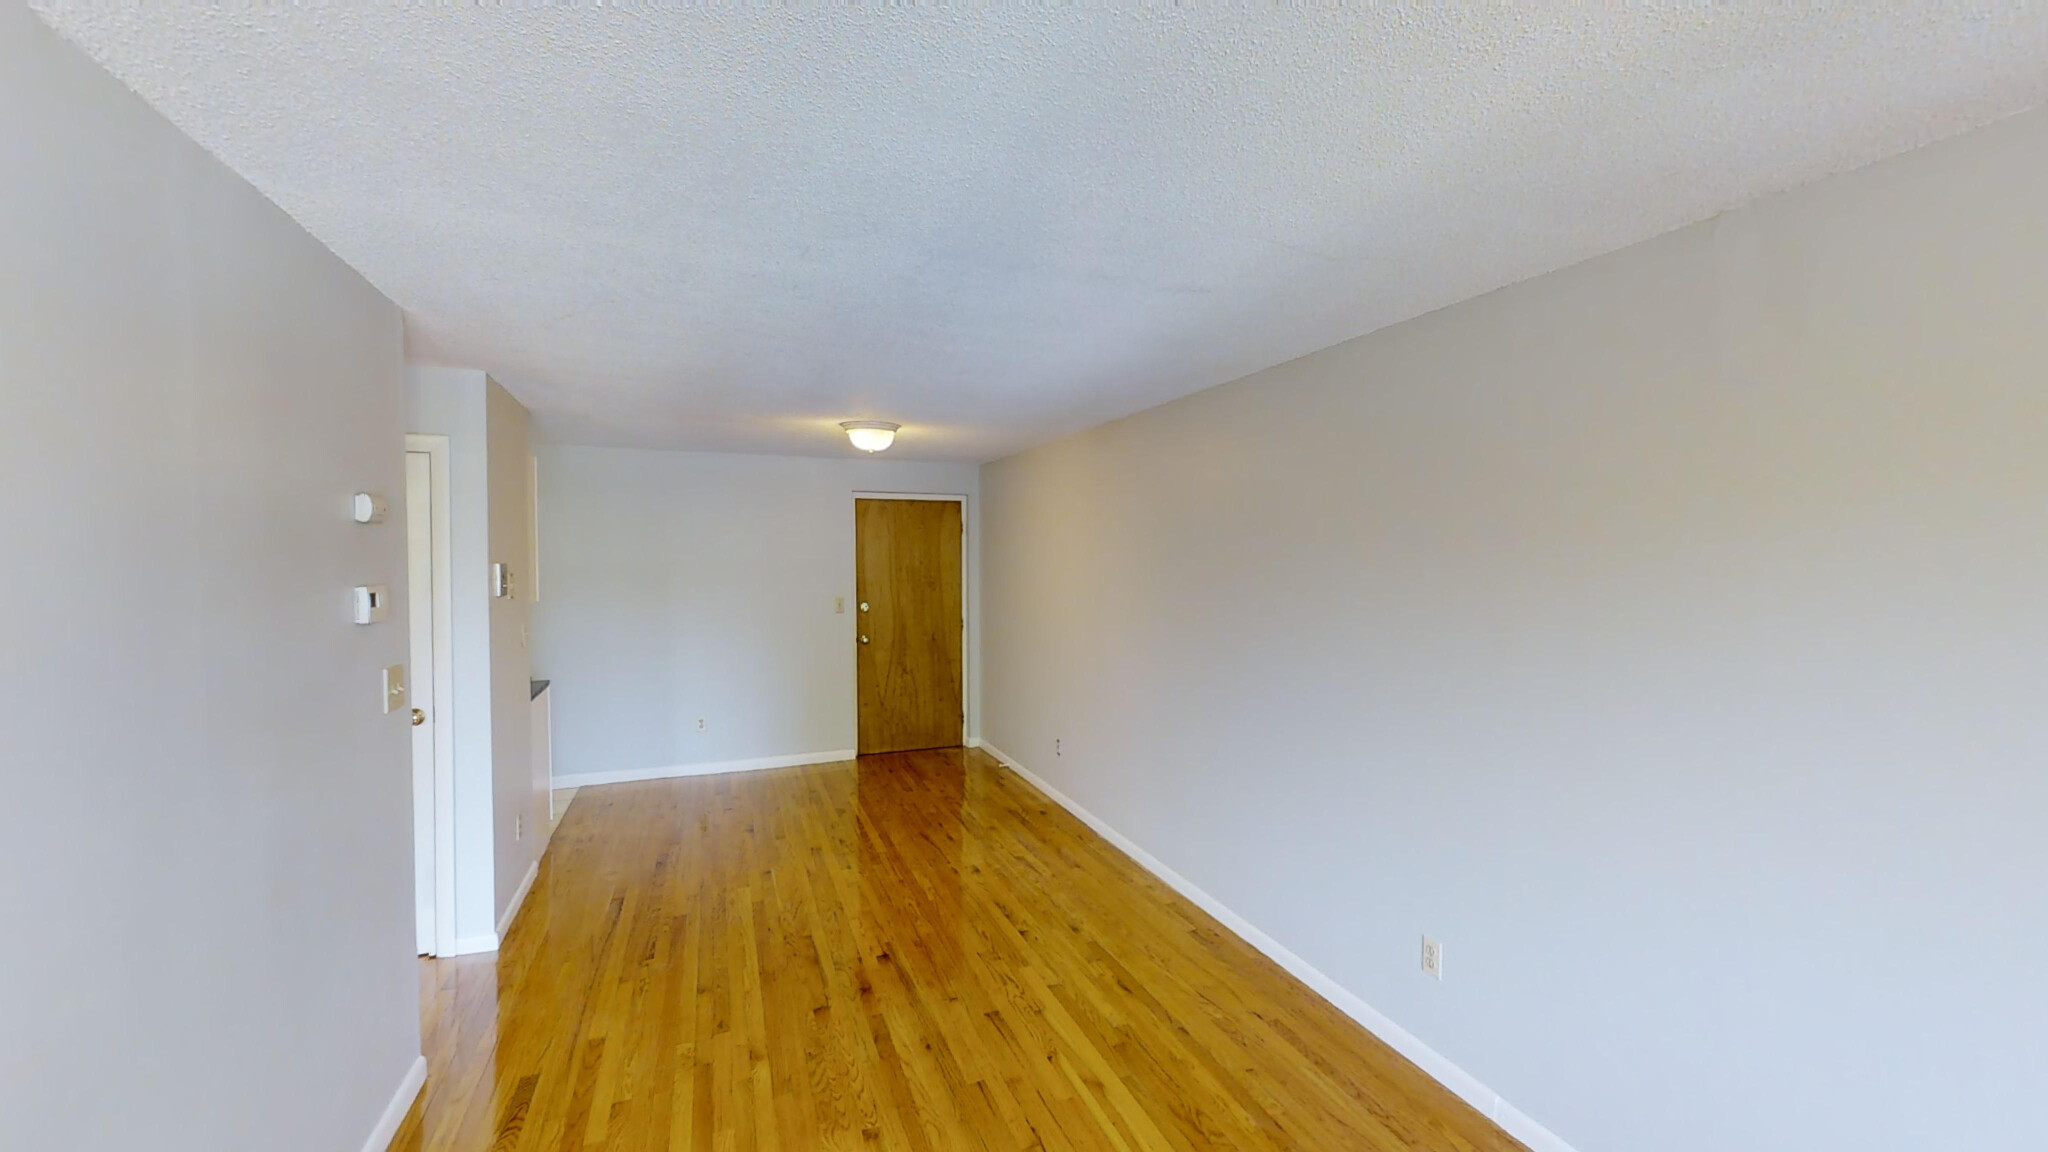 Photos of apartment on Murdock St.,Somerville MA 02145